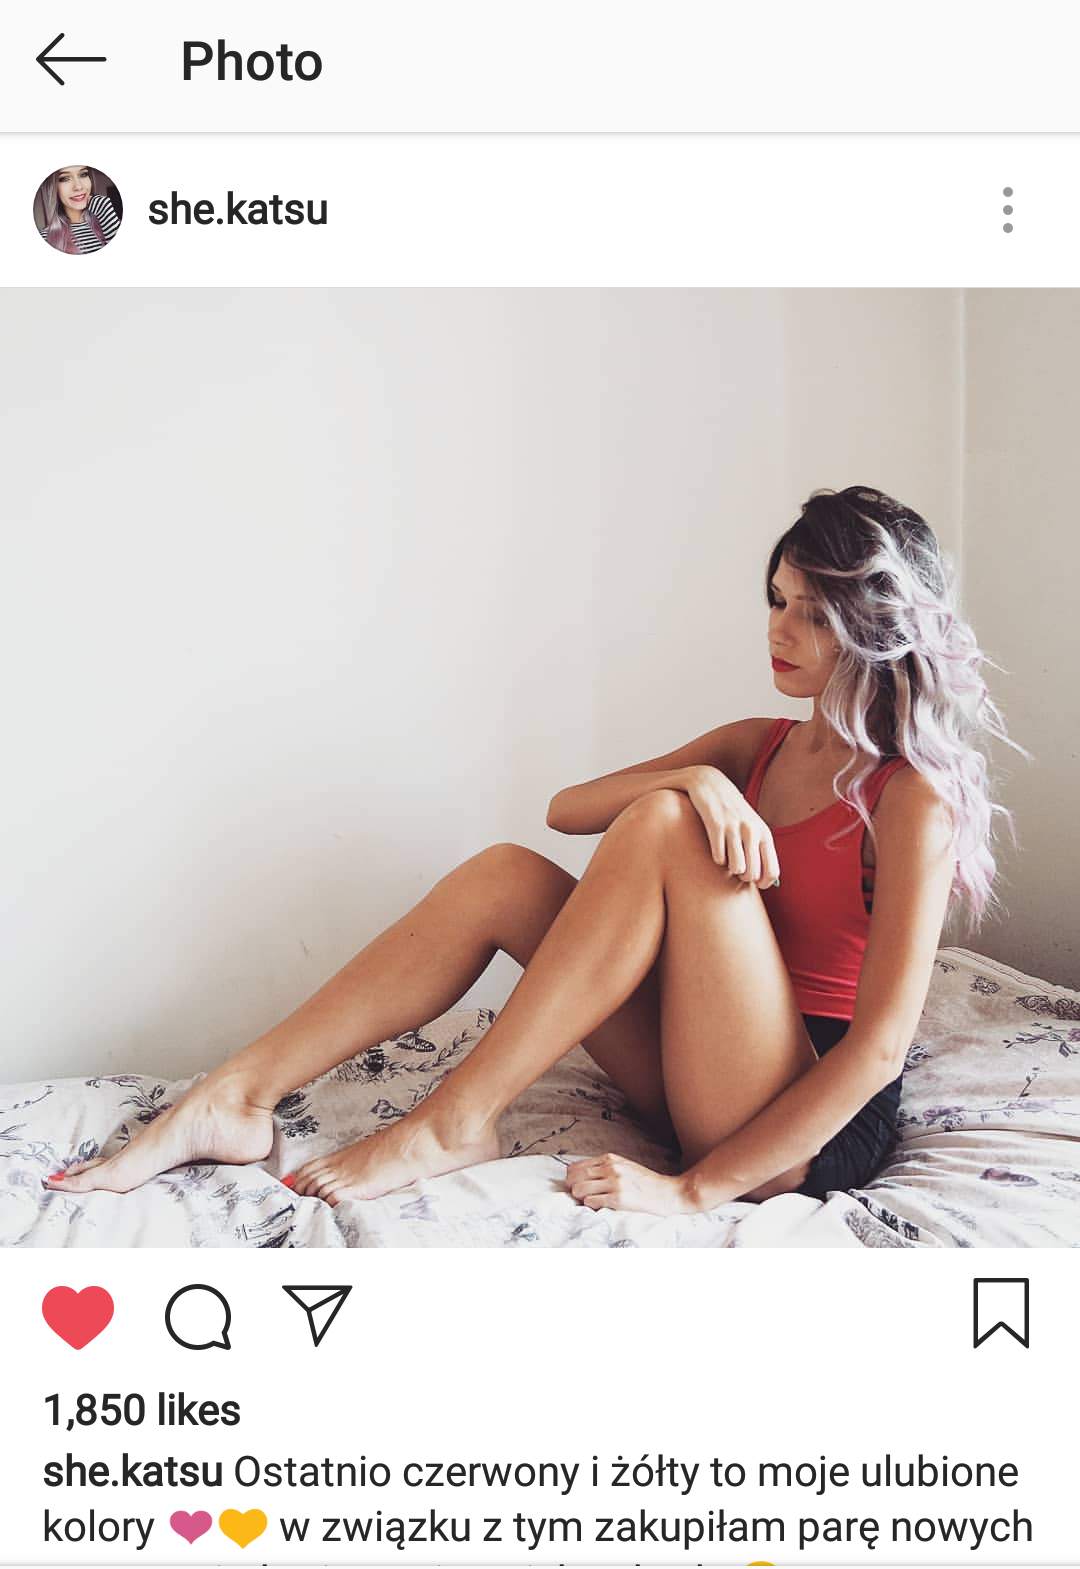 Photo by Slavicigers with the username @Slavicigers, who is a verified user,  December 9, 2018 at 7:46 AM. The post is about the topic Slavic Instagram Girls and the text says 'https://www.instagram.com/she.katsu/'